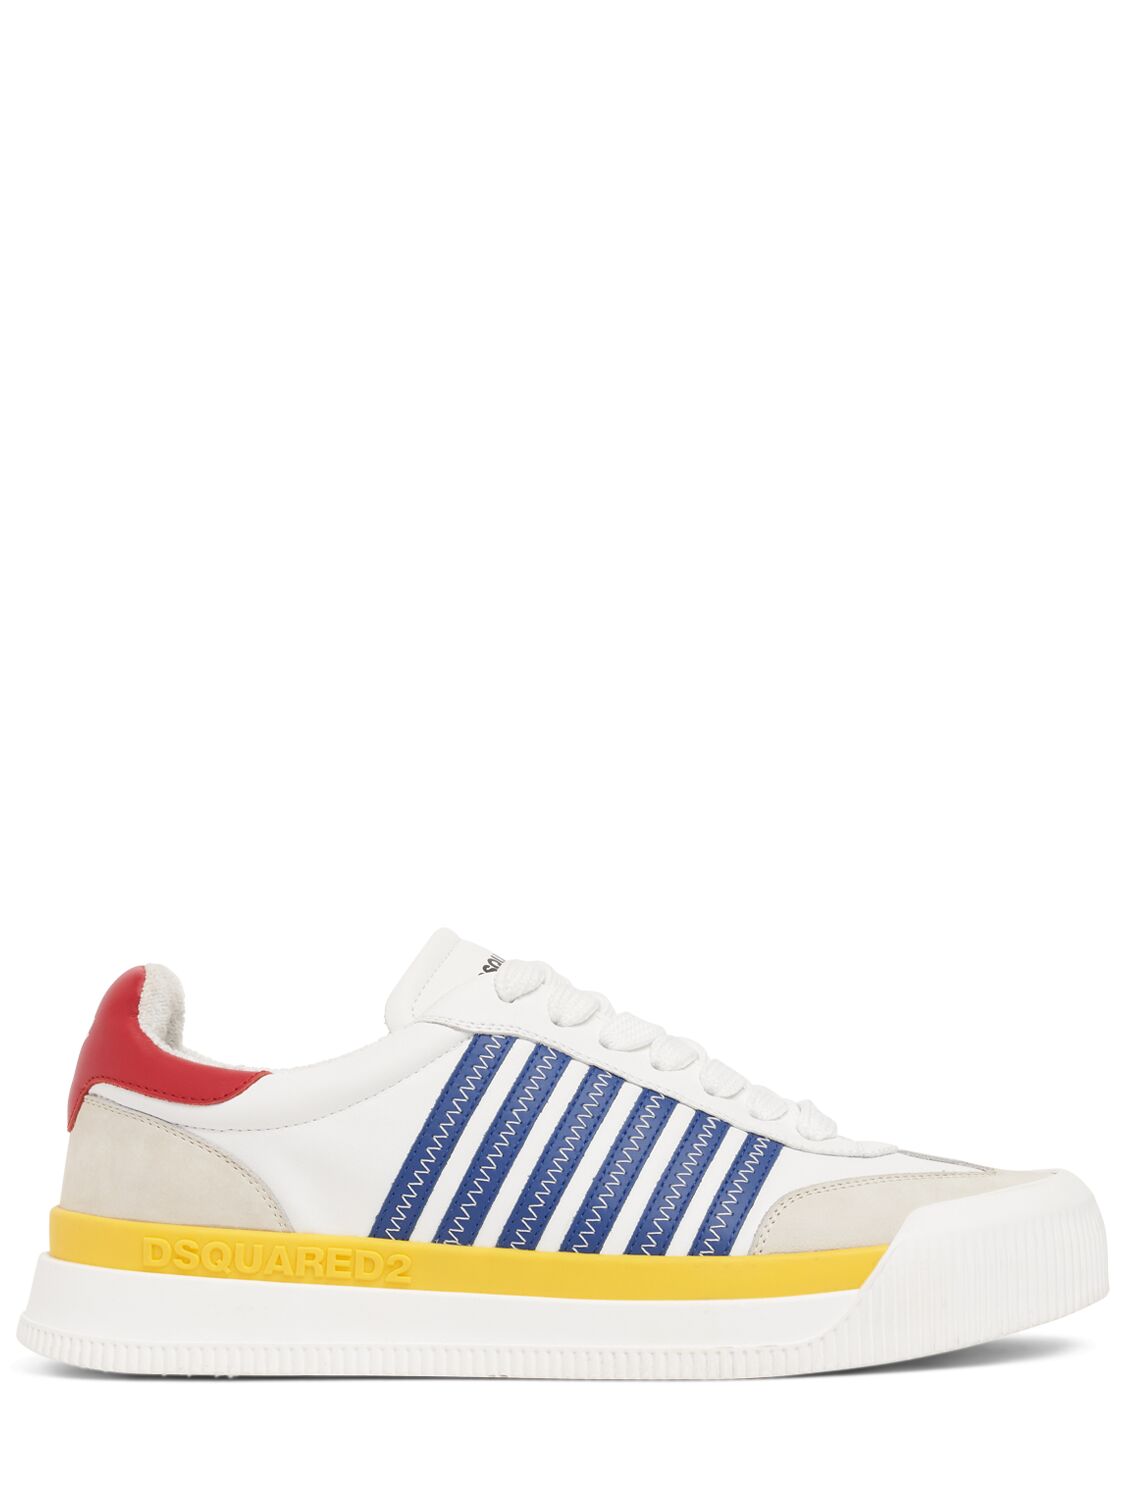 Dsquared2 Logo Leather Sneakers In White,blue